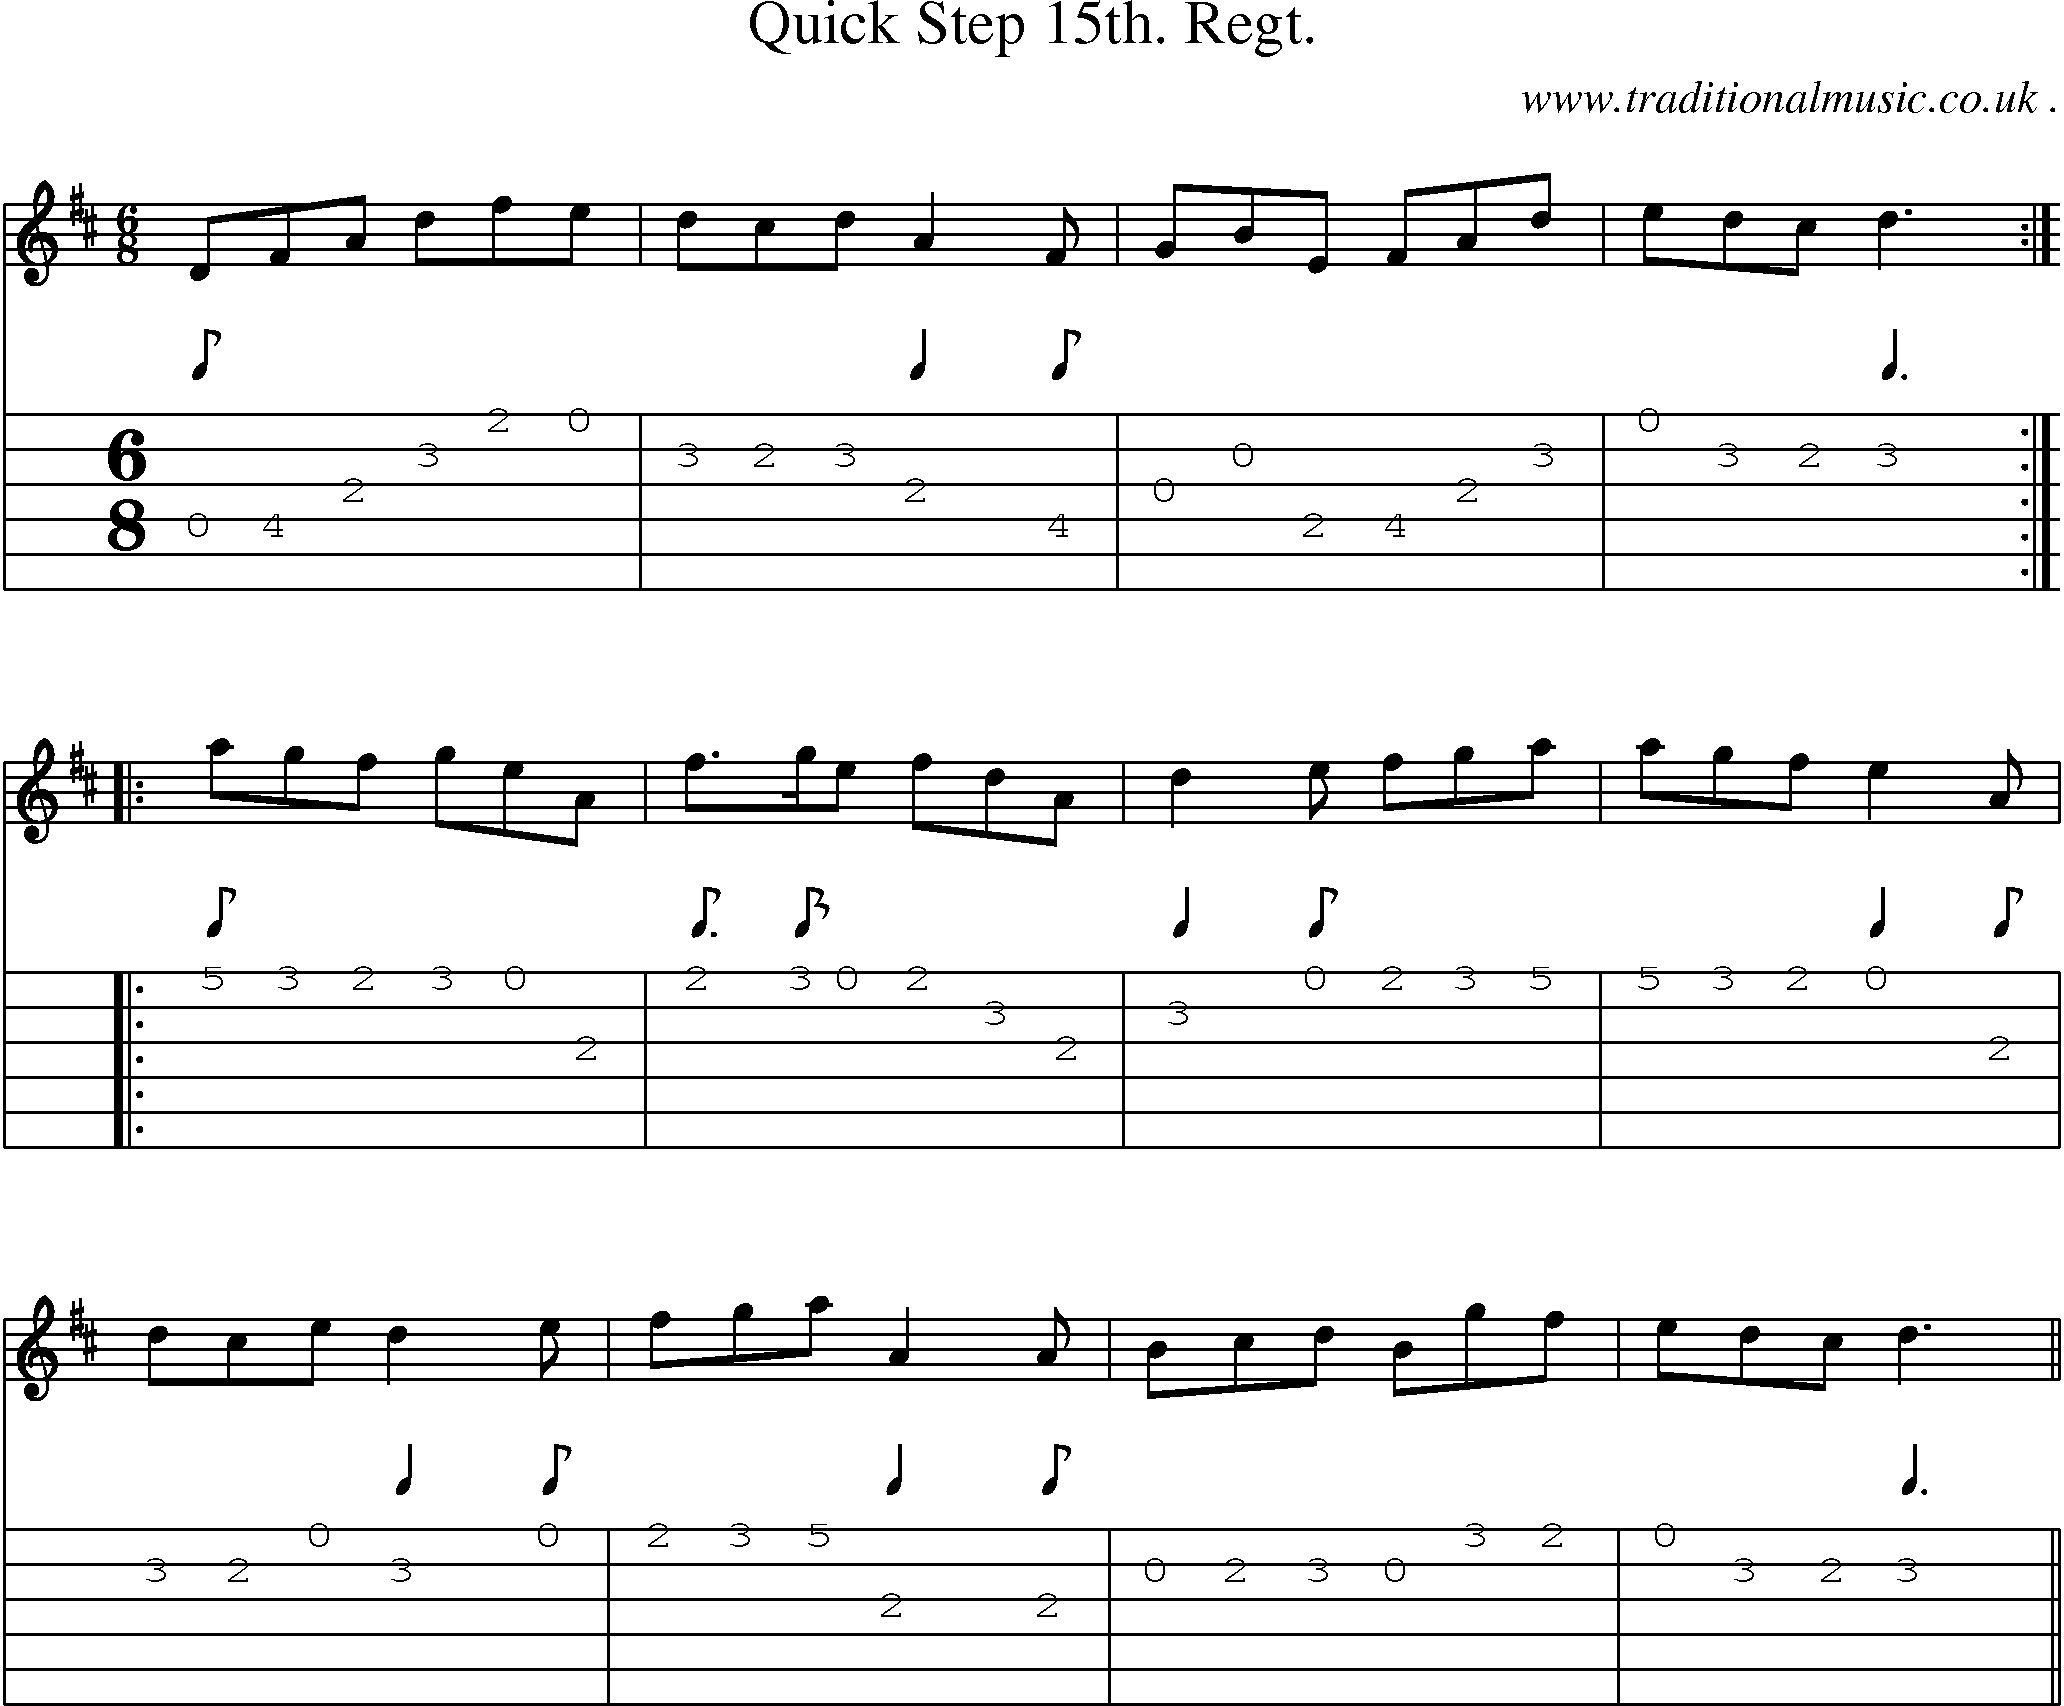 Sheet-Music and Guitar Tabs for Quick Step 15th Regt